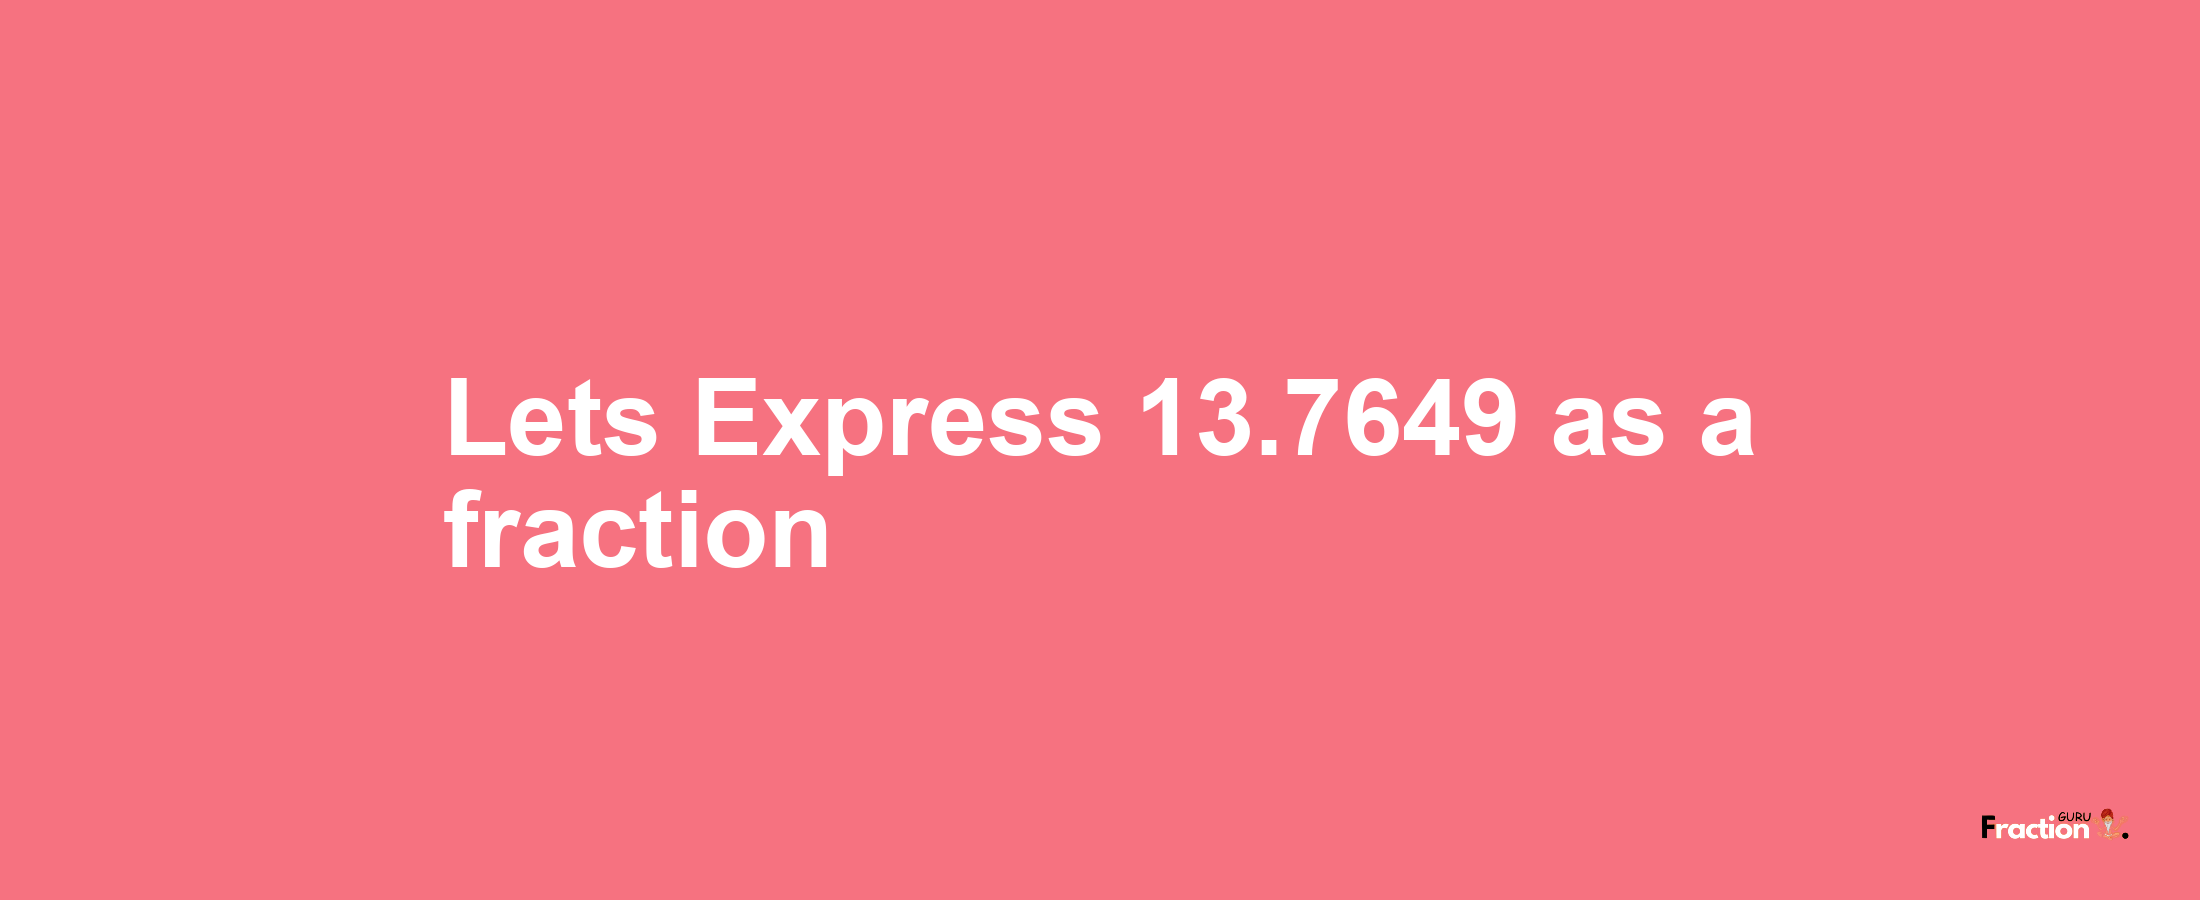 Lets Express 13.7649 as afraction